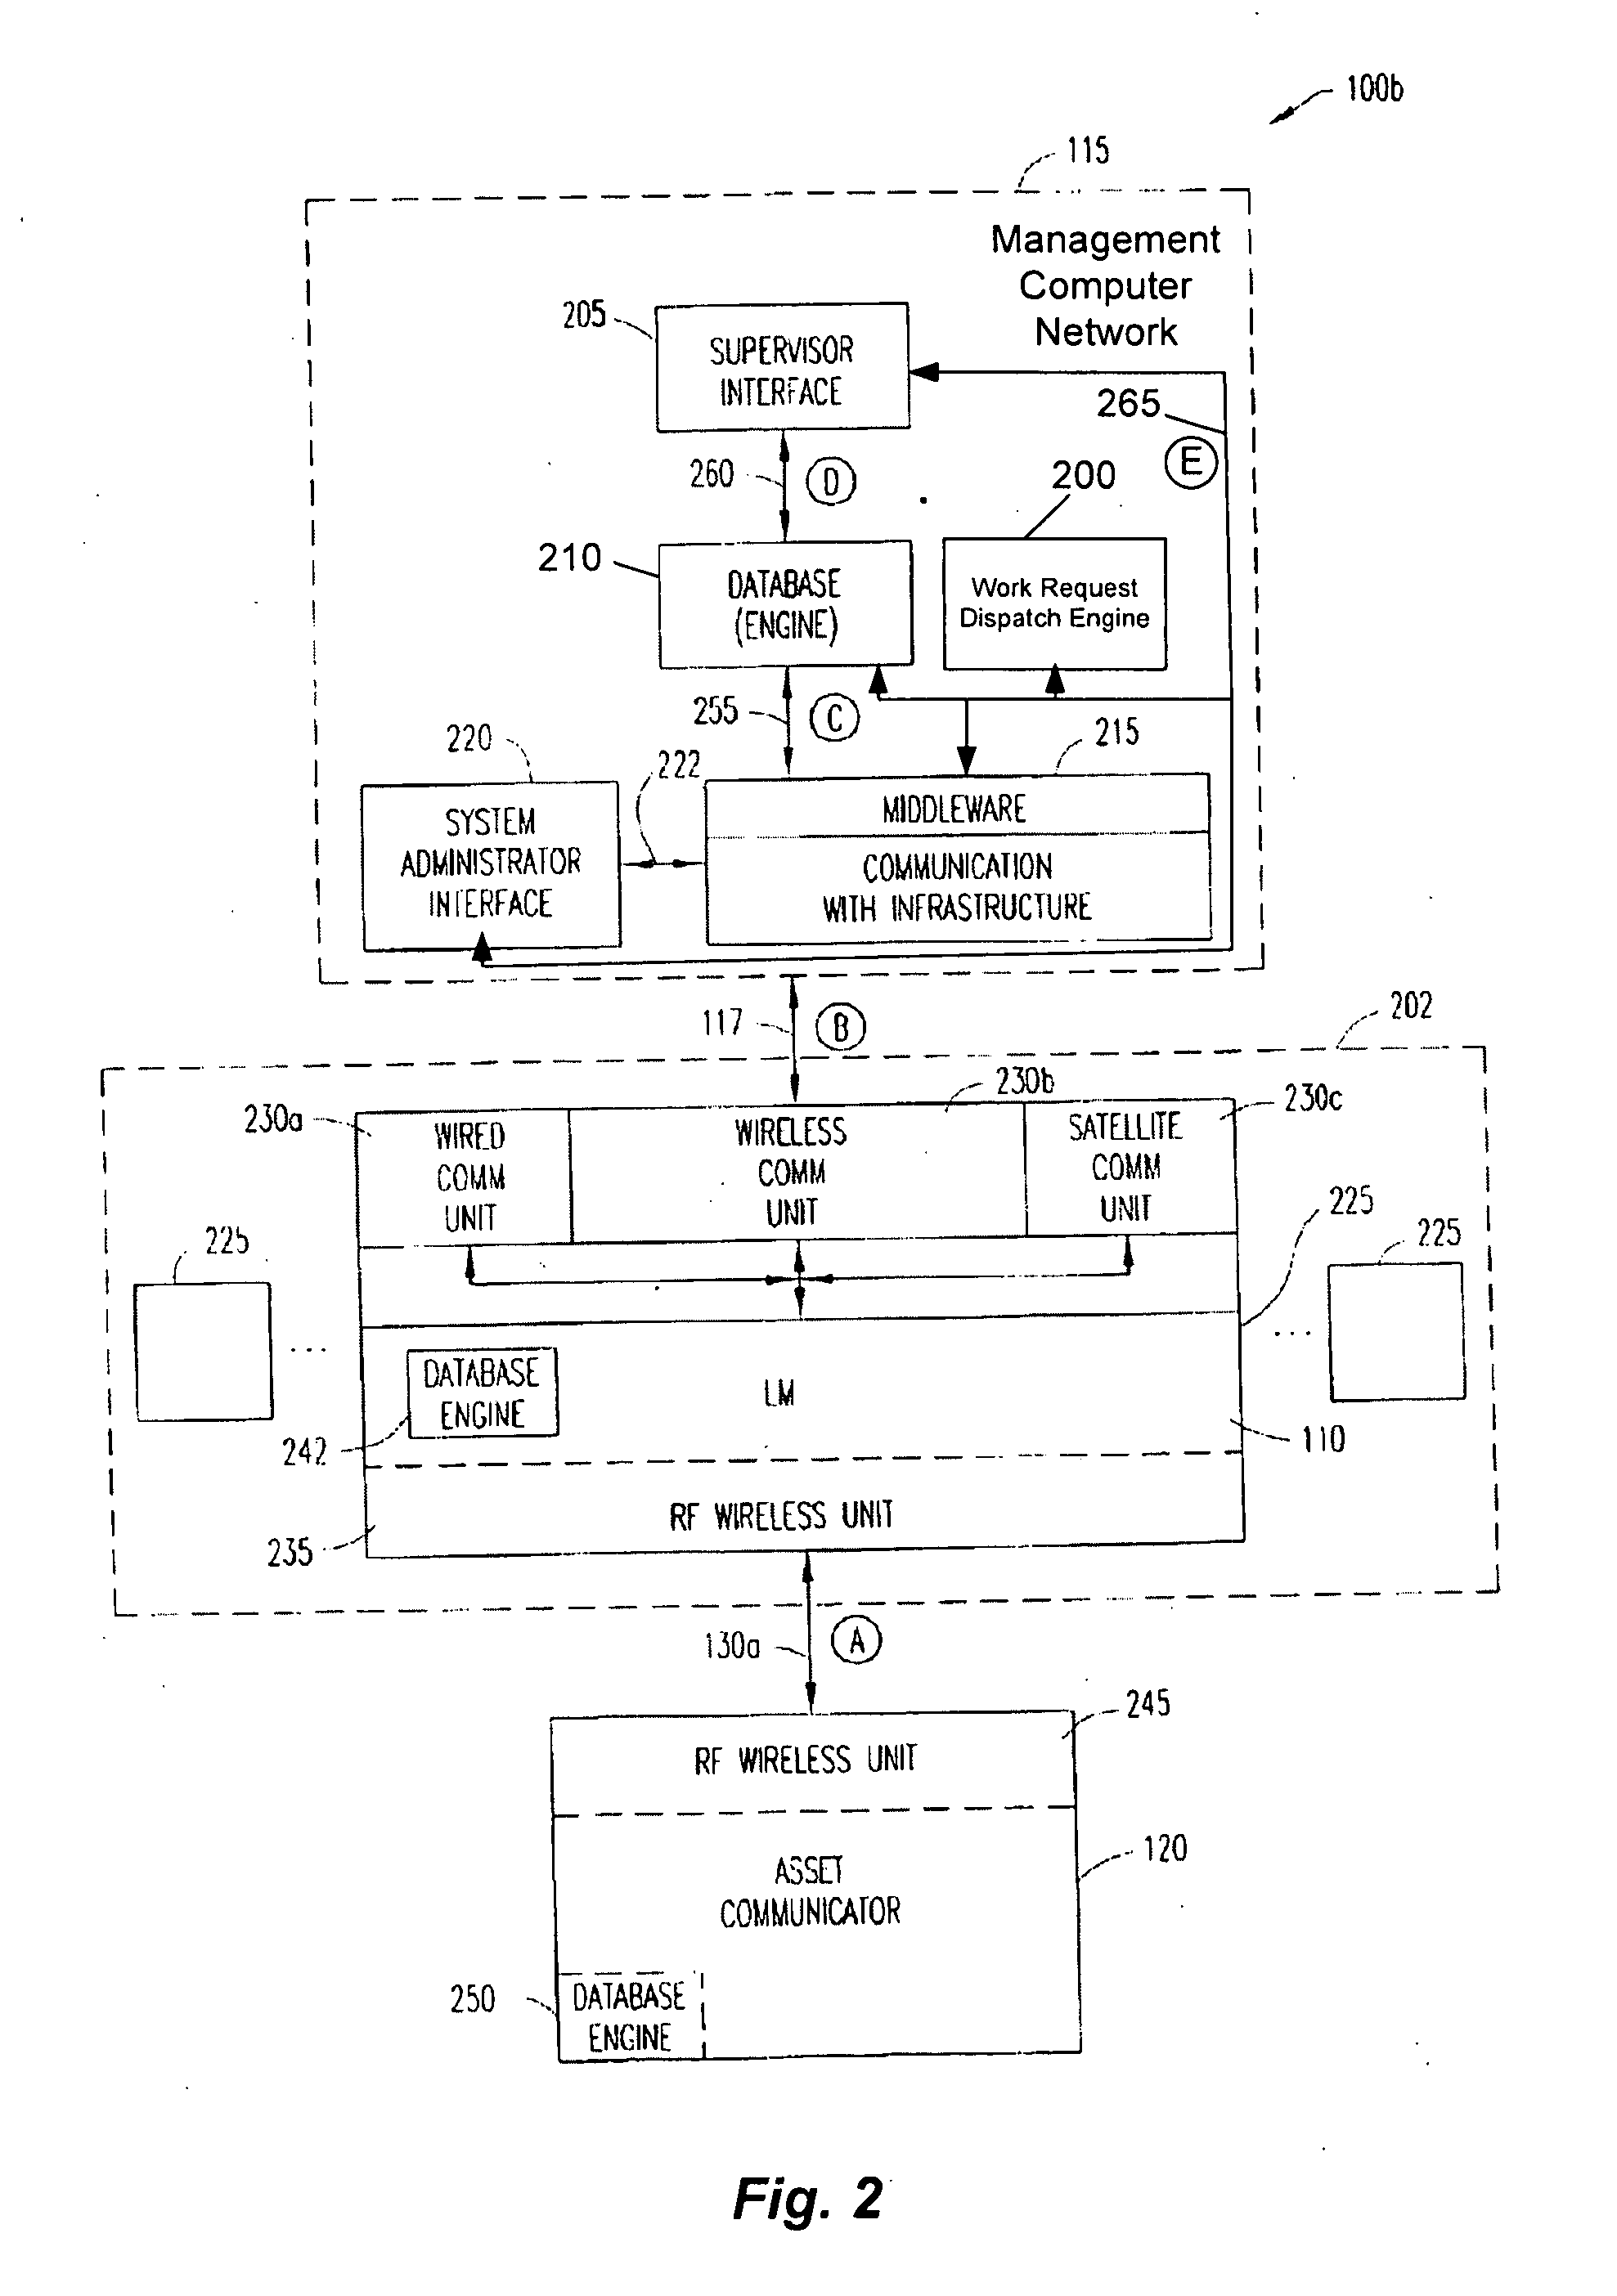 System and method for managing work requests for mobile assets